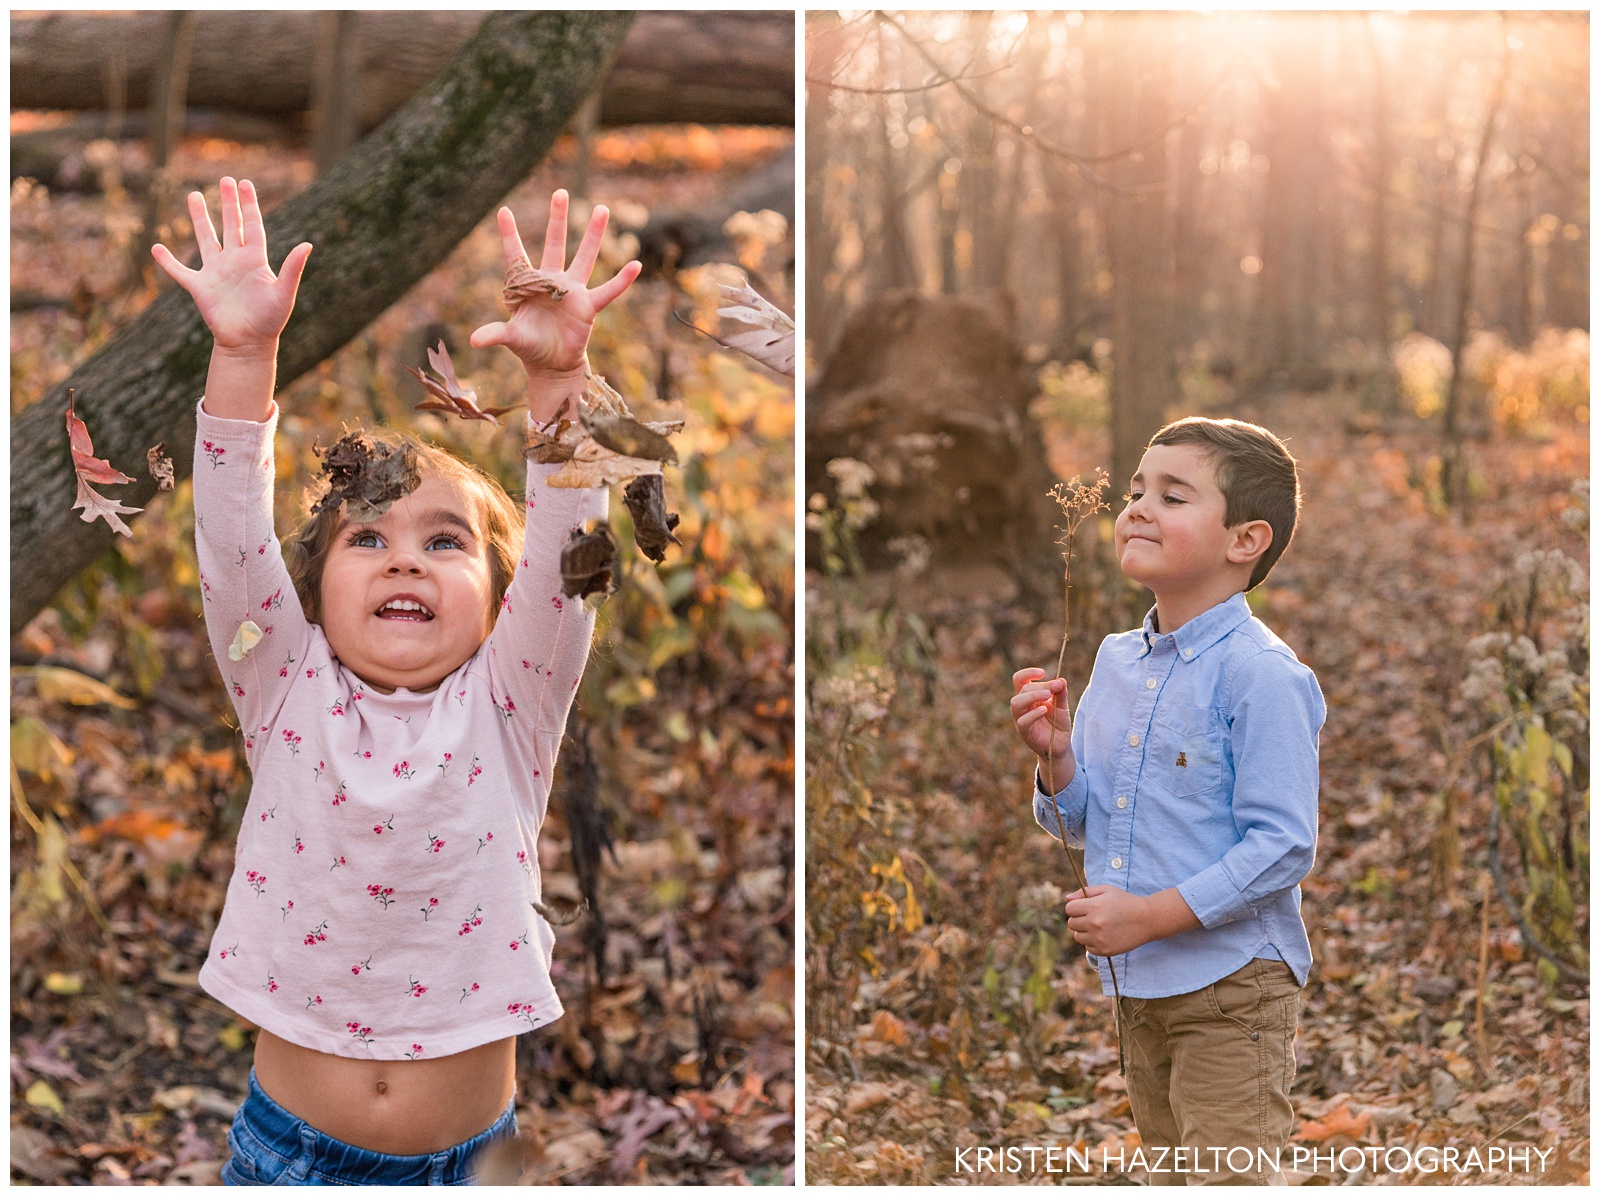 Portraits of happy young kids